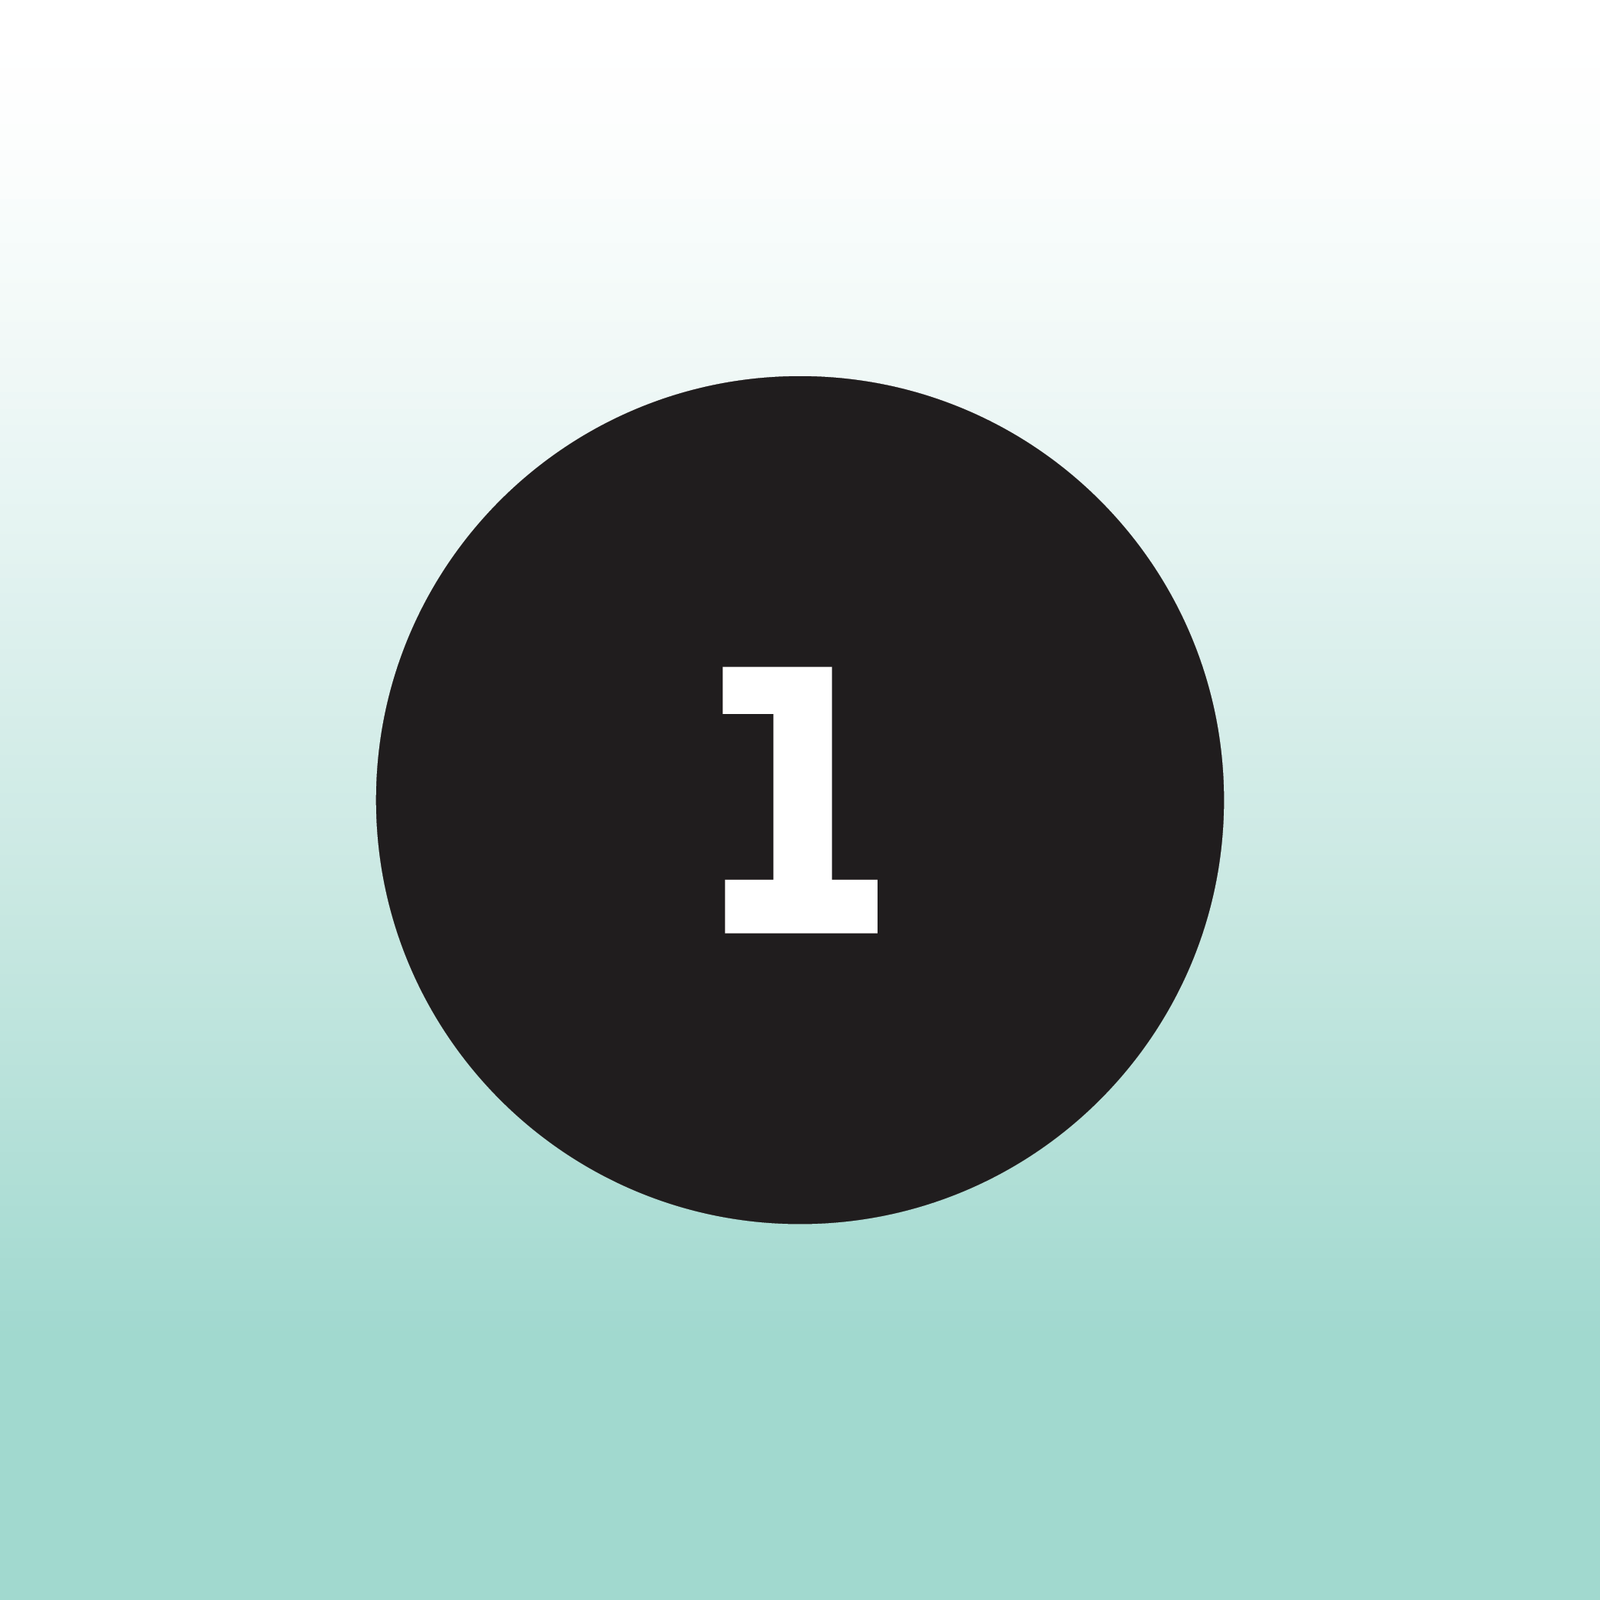 teal gradient background with a black circle and the number 1 in white in the center